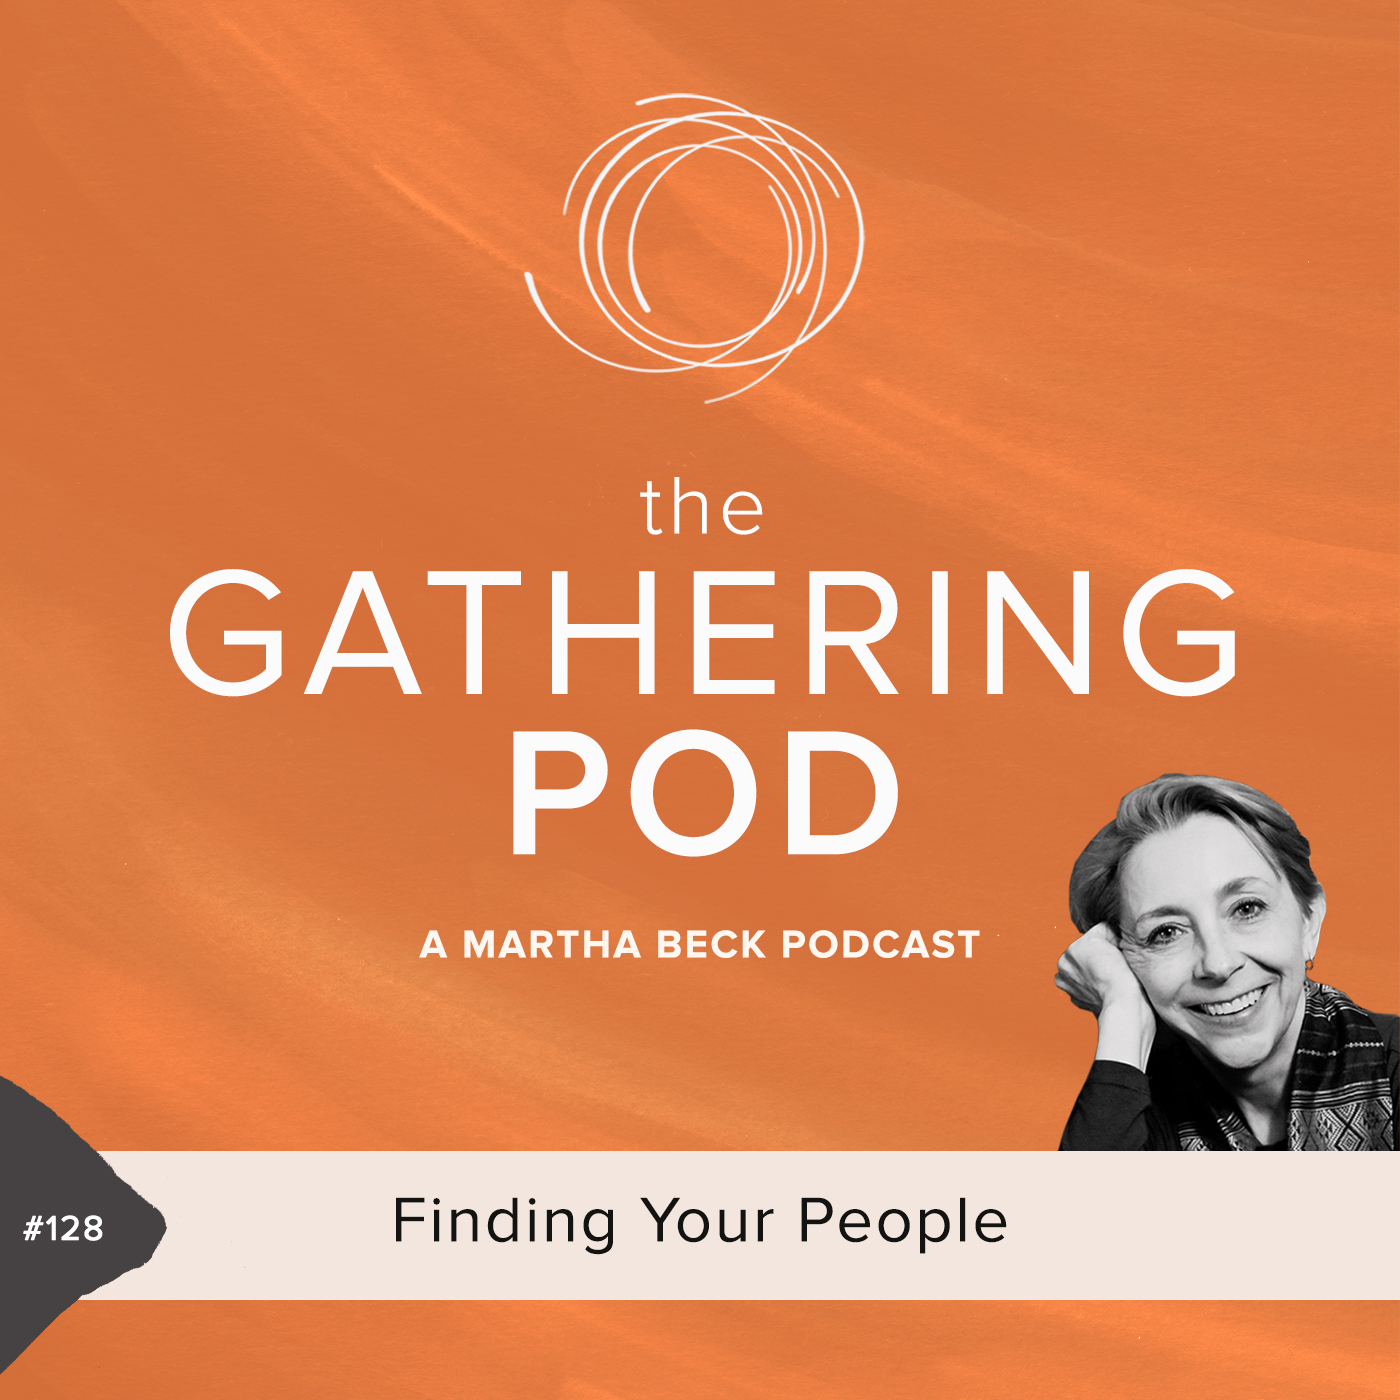 Image for The Gathering Pod A Martha Beck Podcast Episode #128 Finding Your People